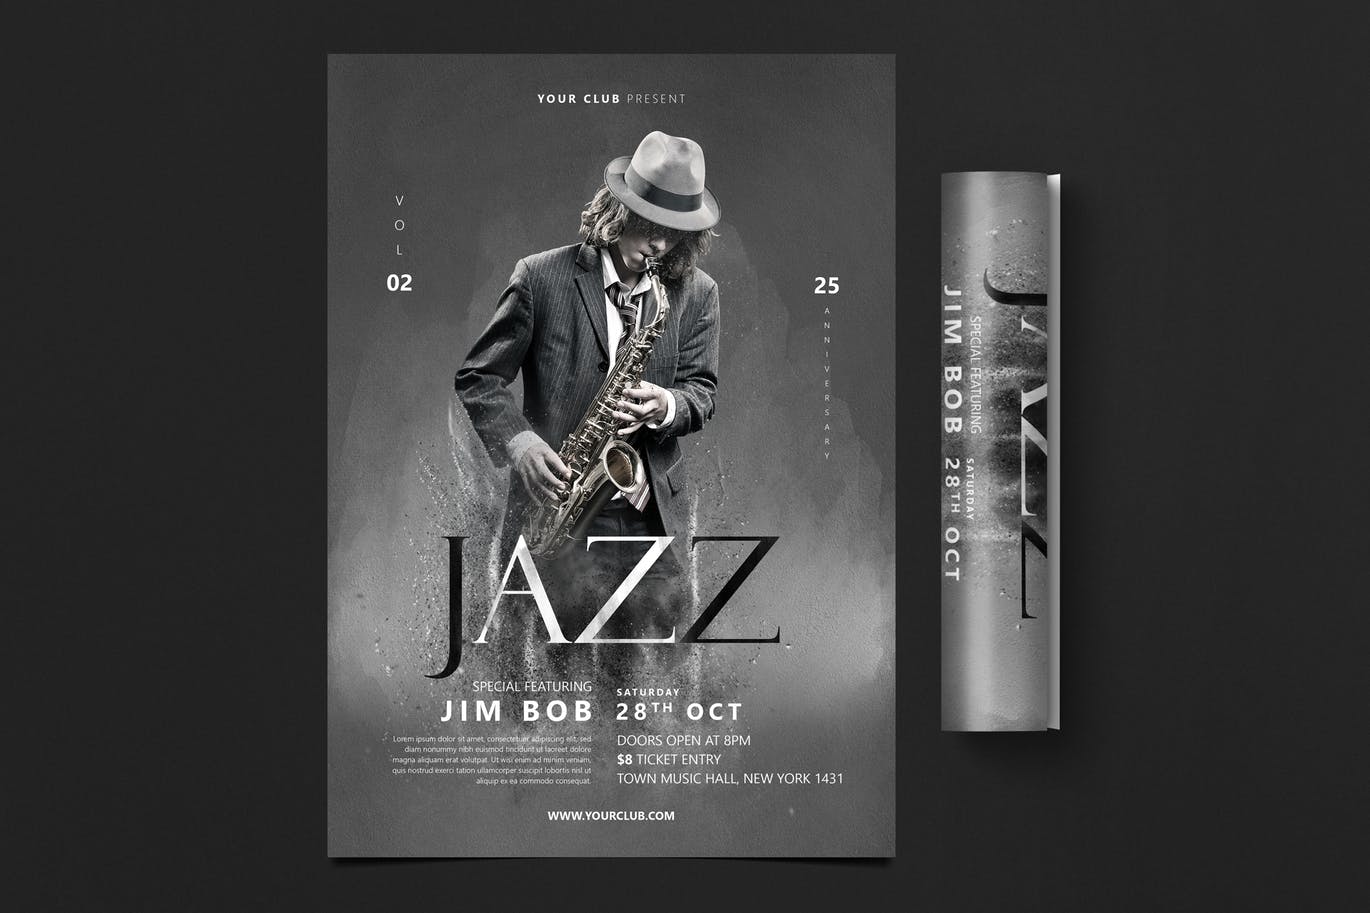 A jazz music flyer template in black and white